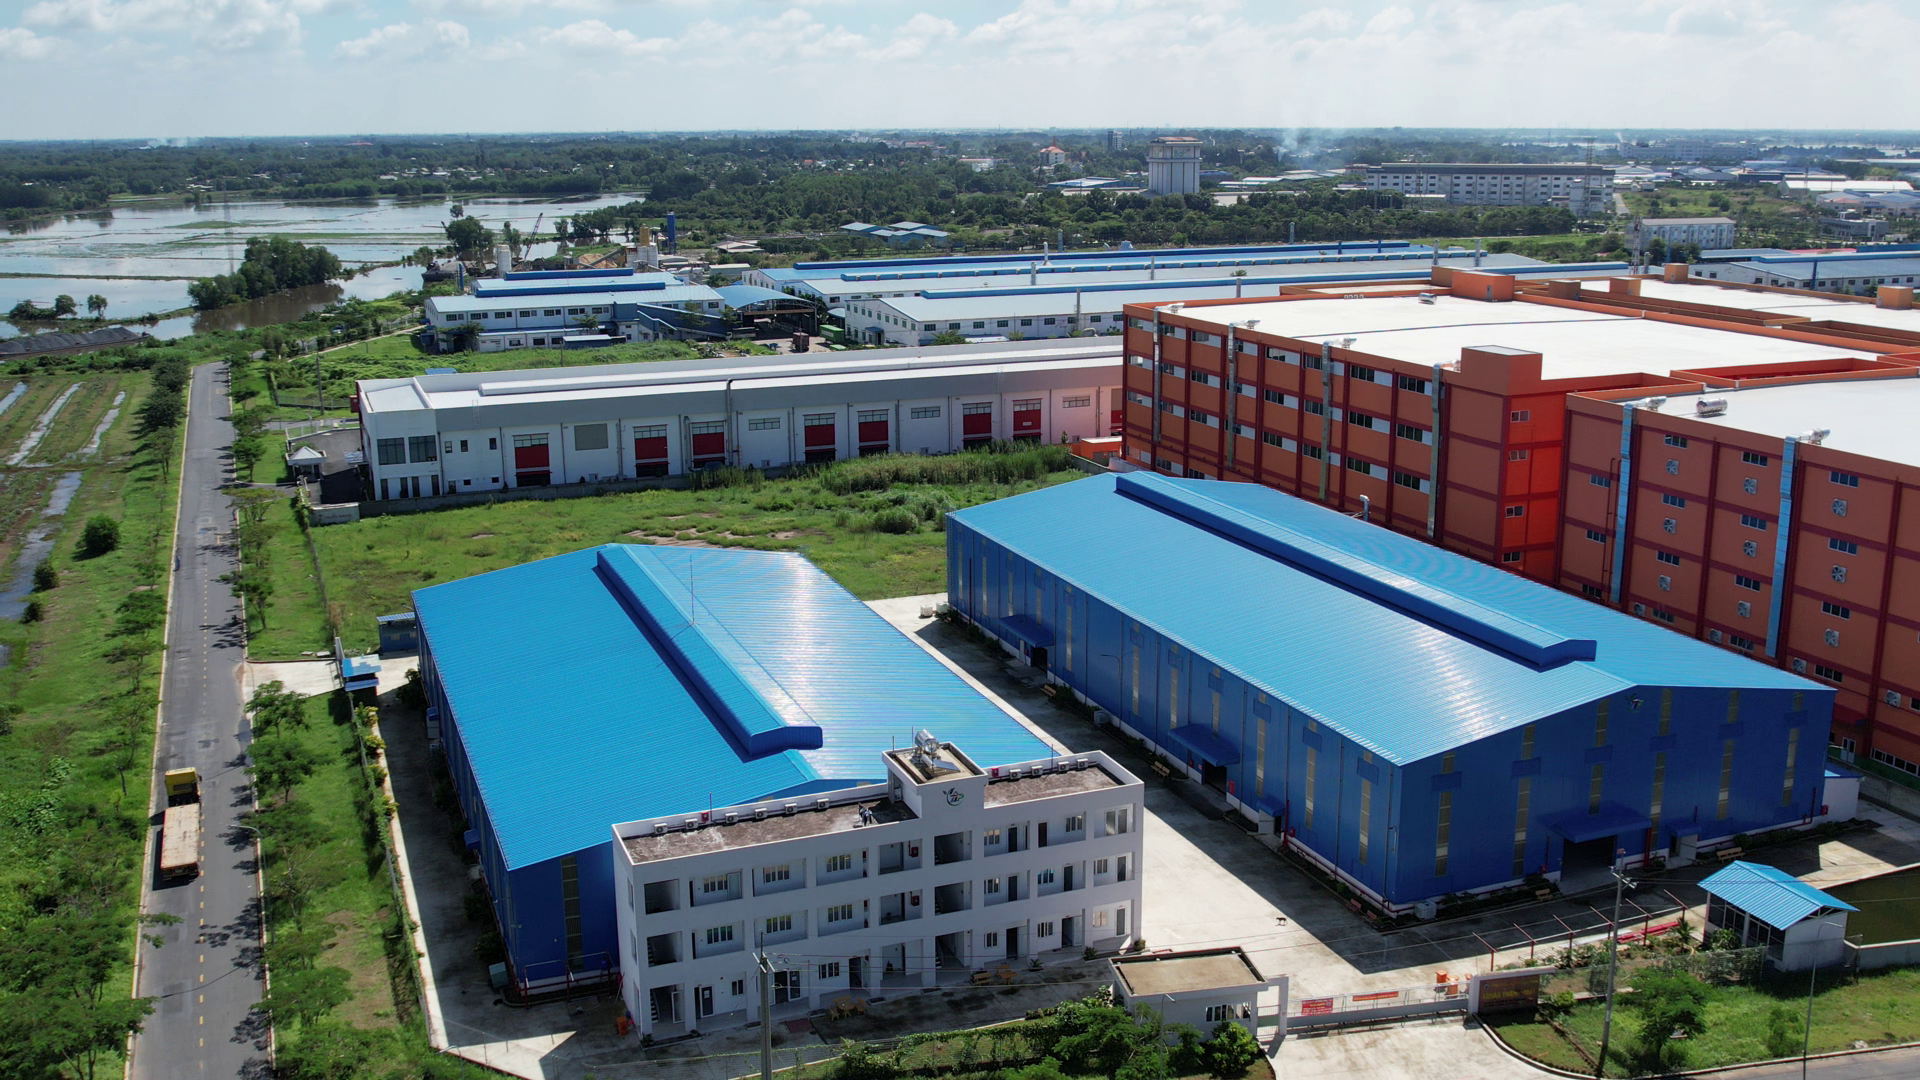 FACTORY FOR MANUFACTURING, BOILING, PACKAGING PLANT PROTECTION DRUGS